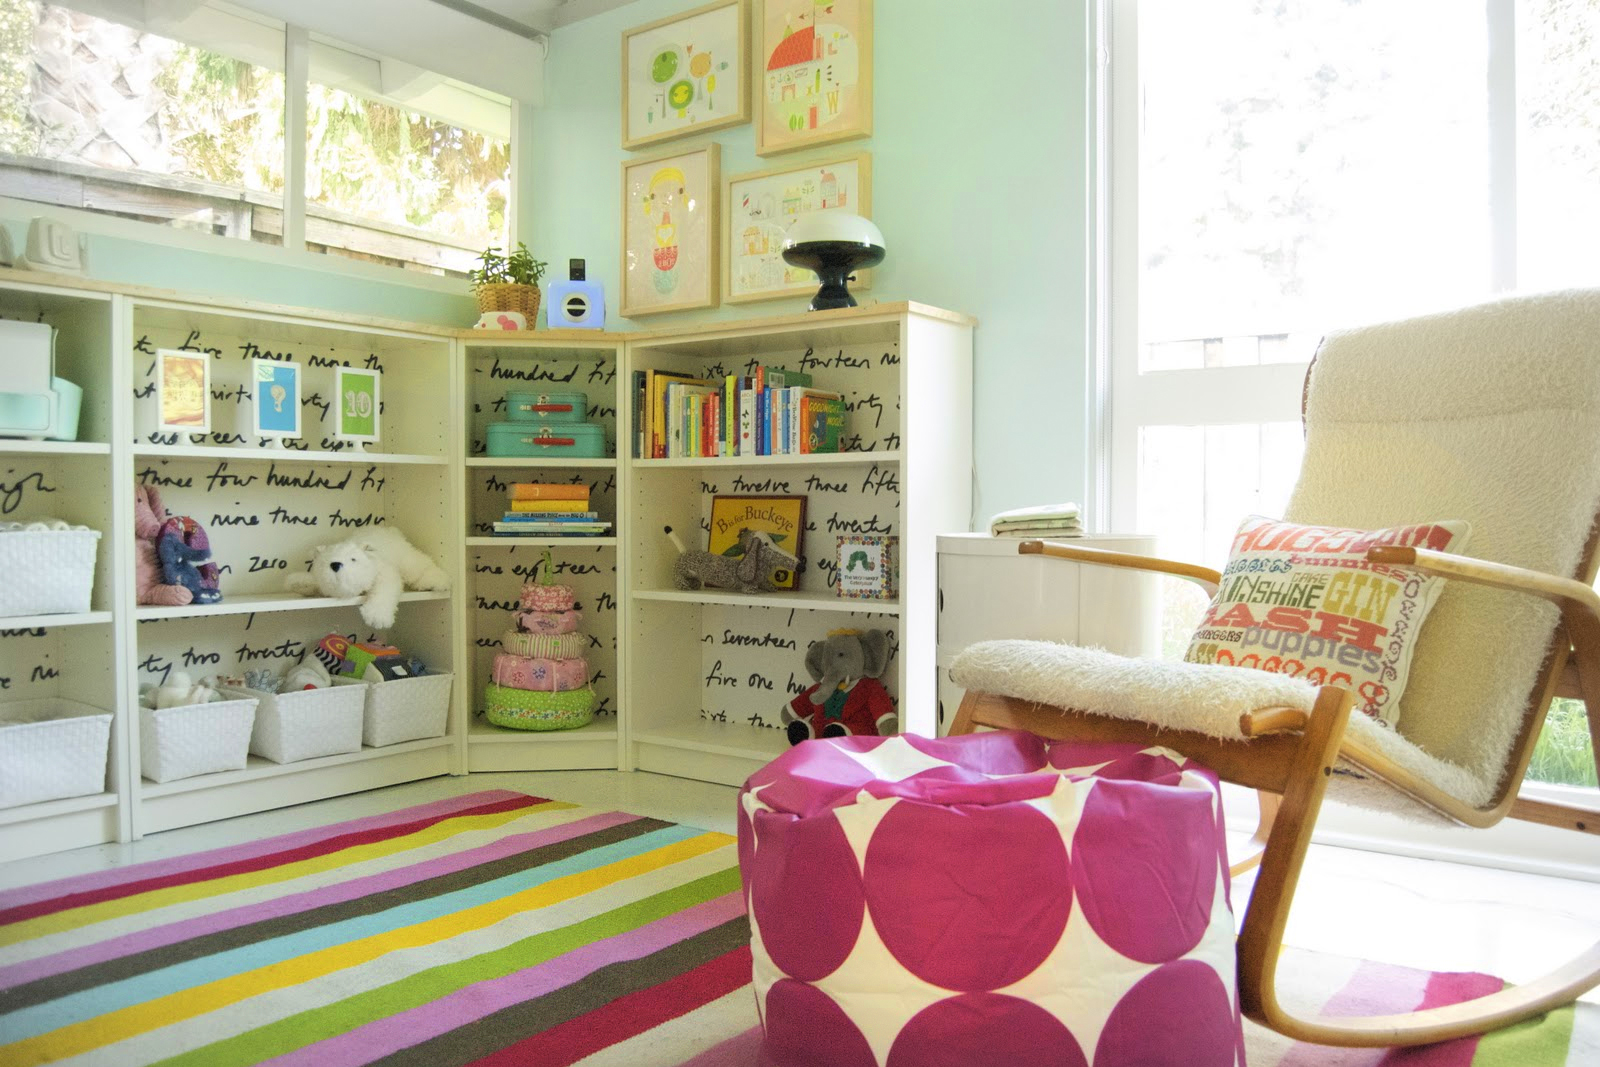 kids room storage ideas for small room